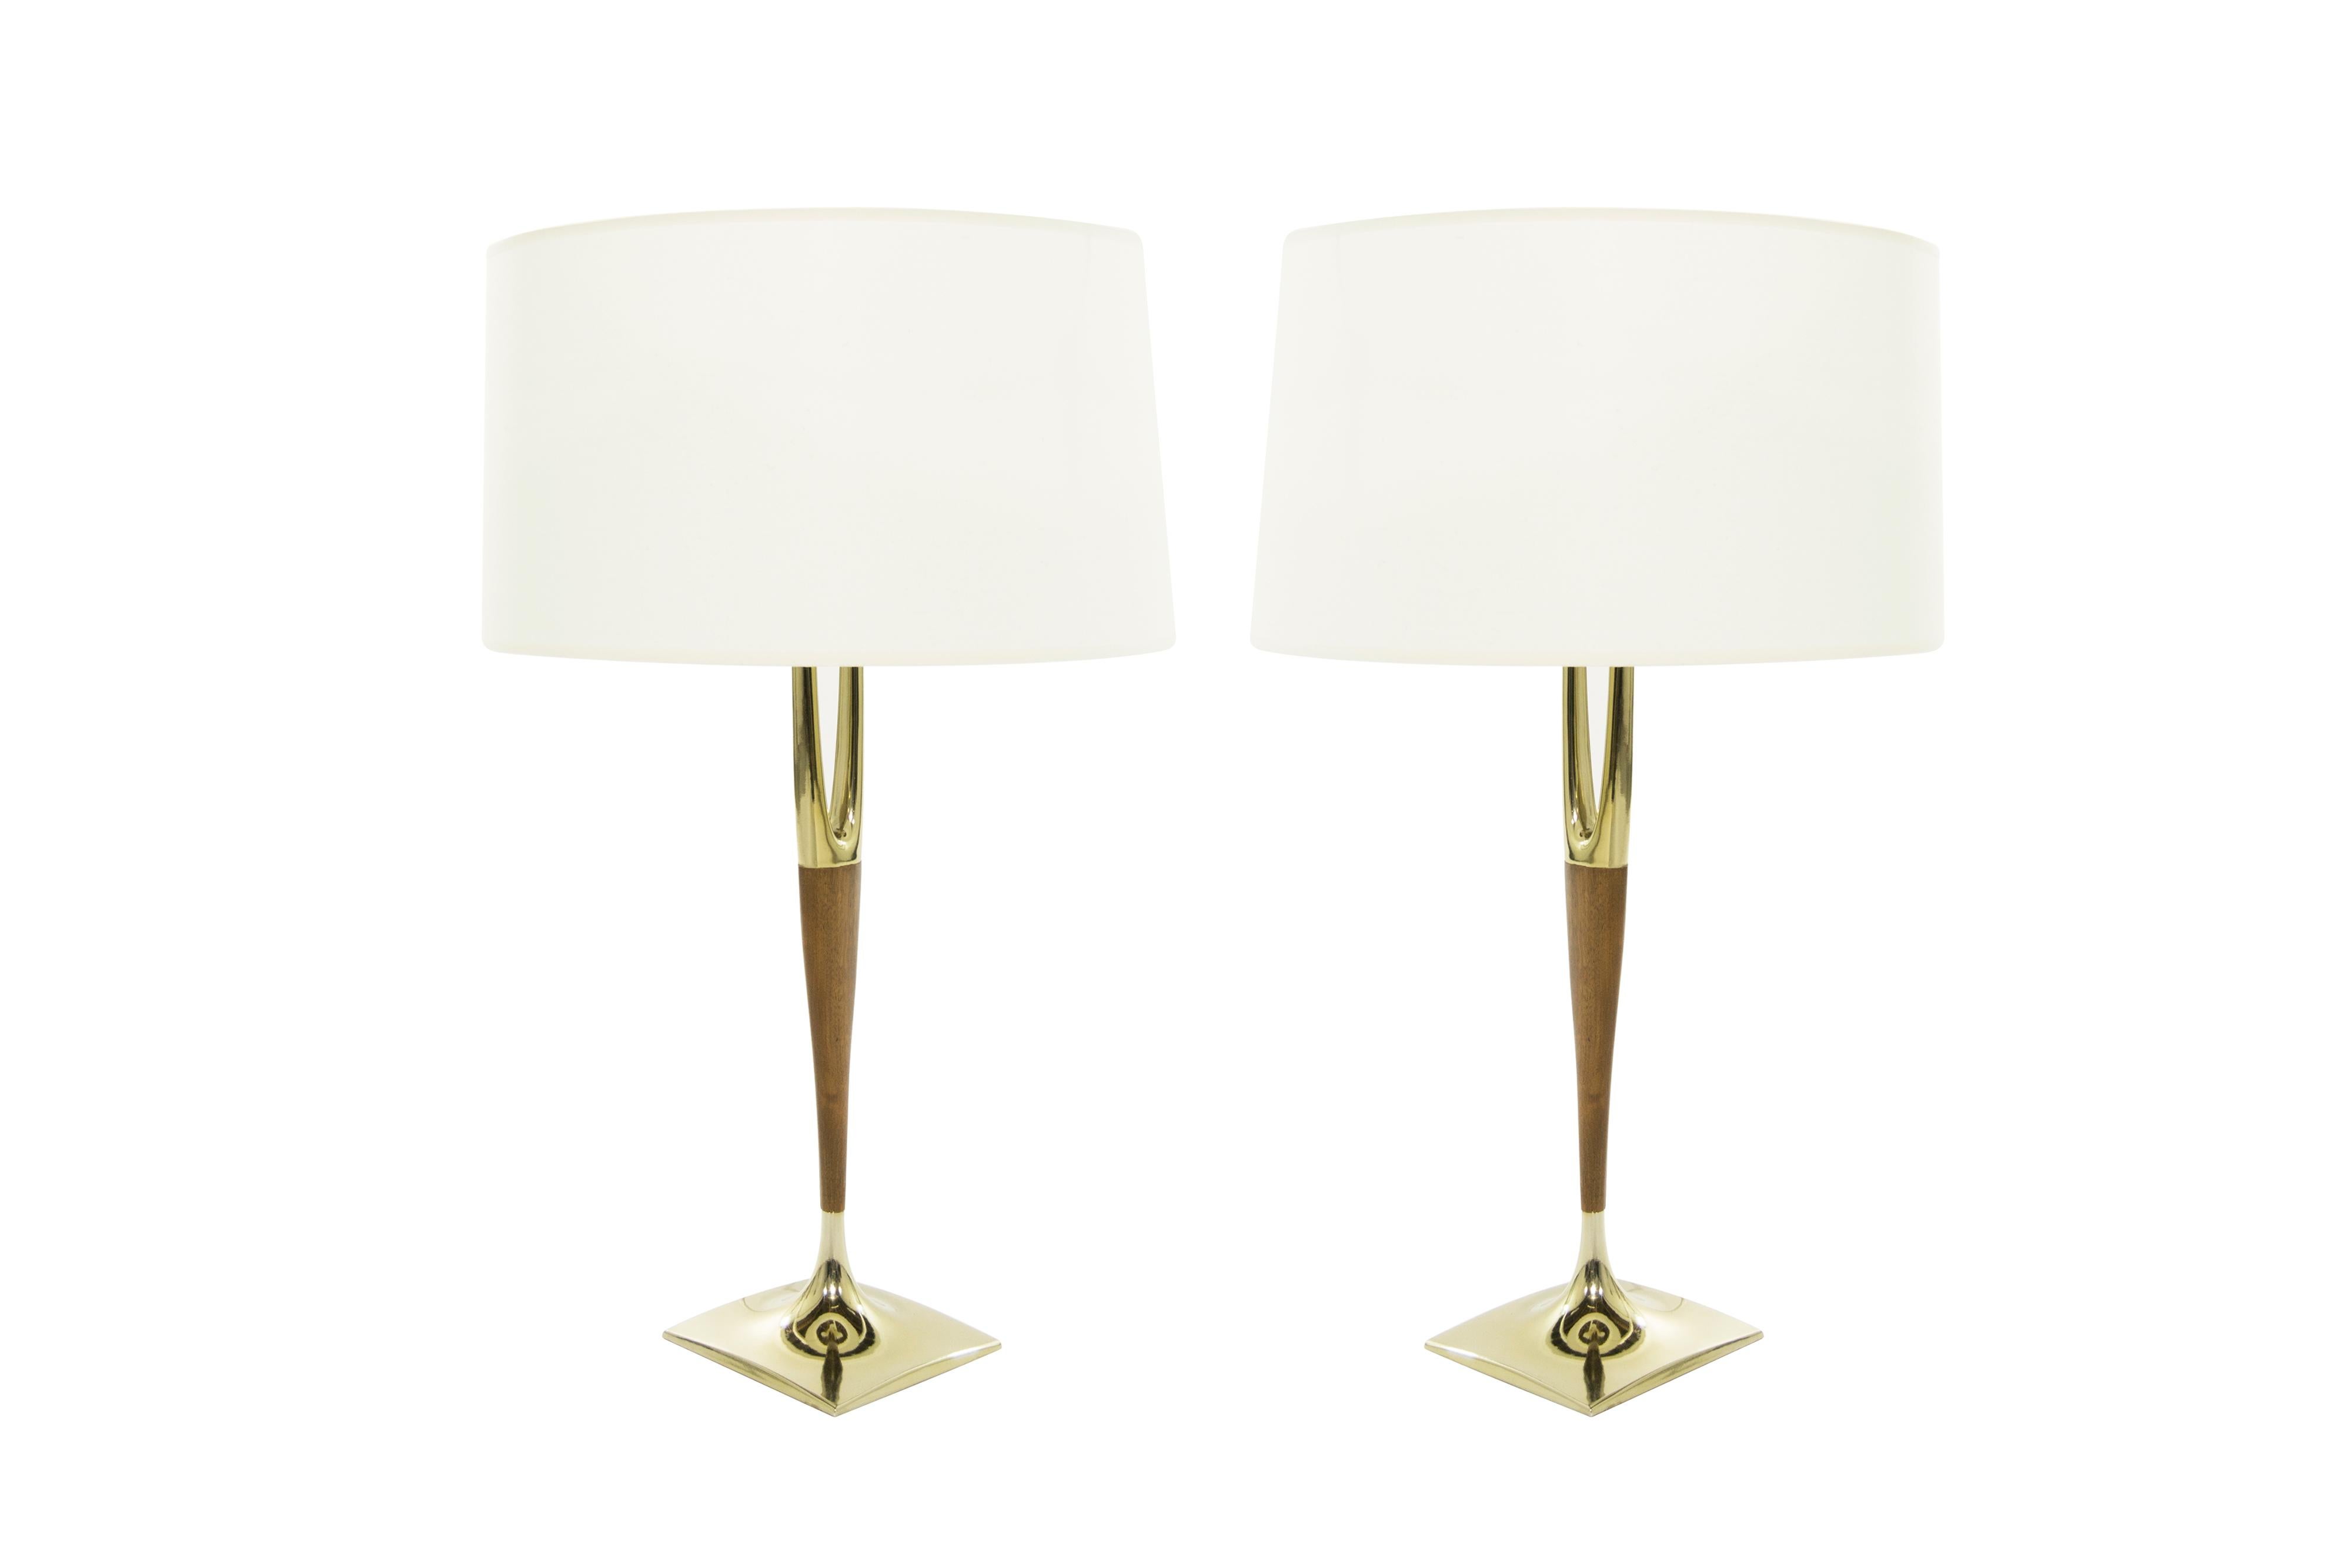 Fully restored pair of brass and walnut table lamps designed by Gerald Thurston for Laurel Lamp Company, circa 1950s.

Brass and walnut have been fully restored. Newly rewired. New linen shades included.